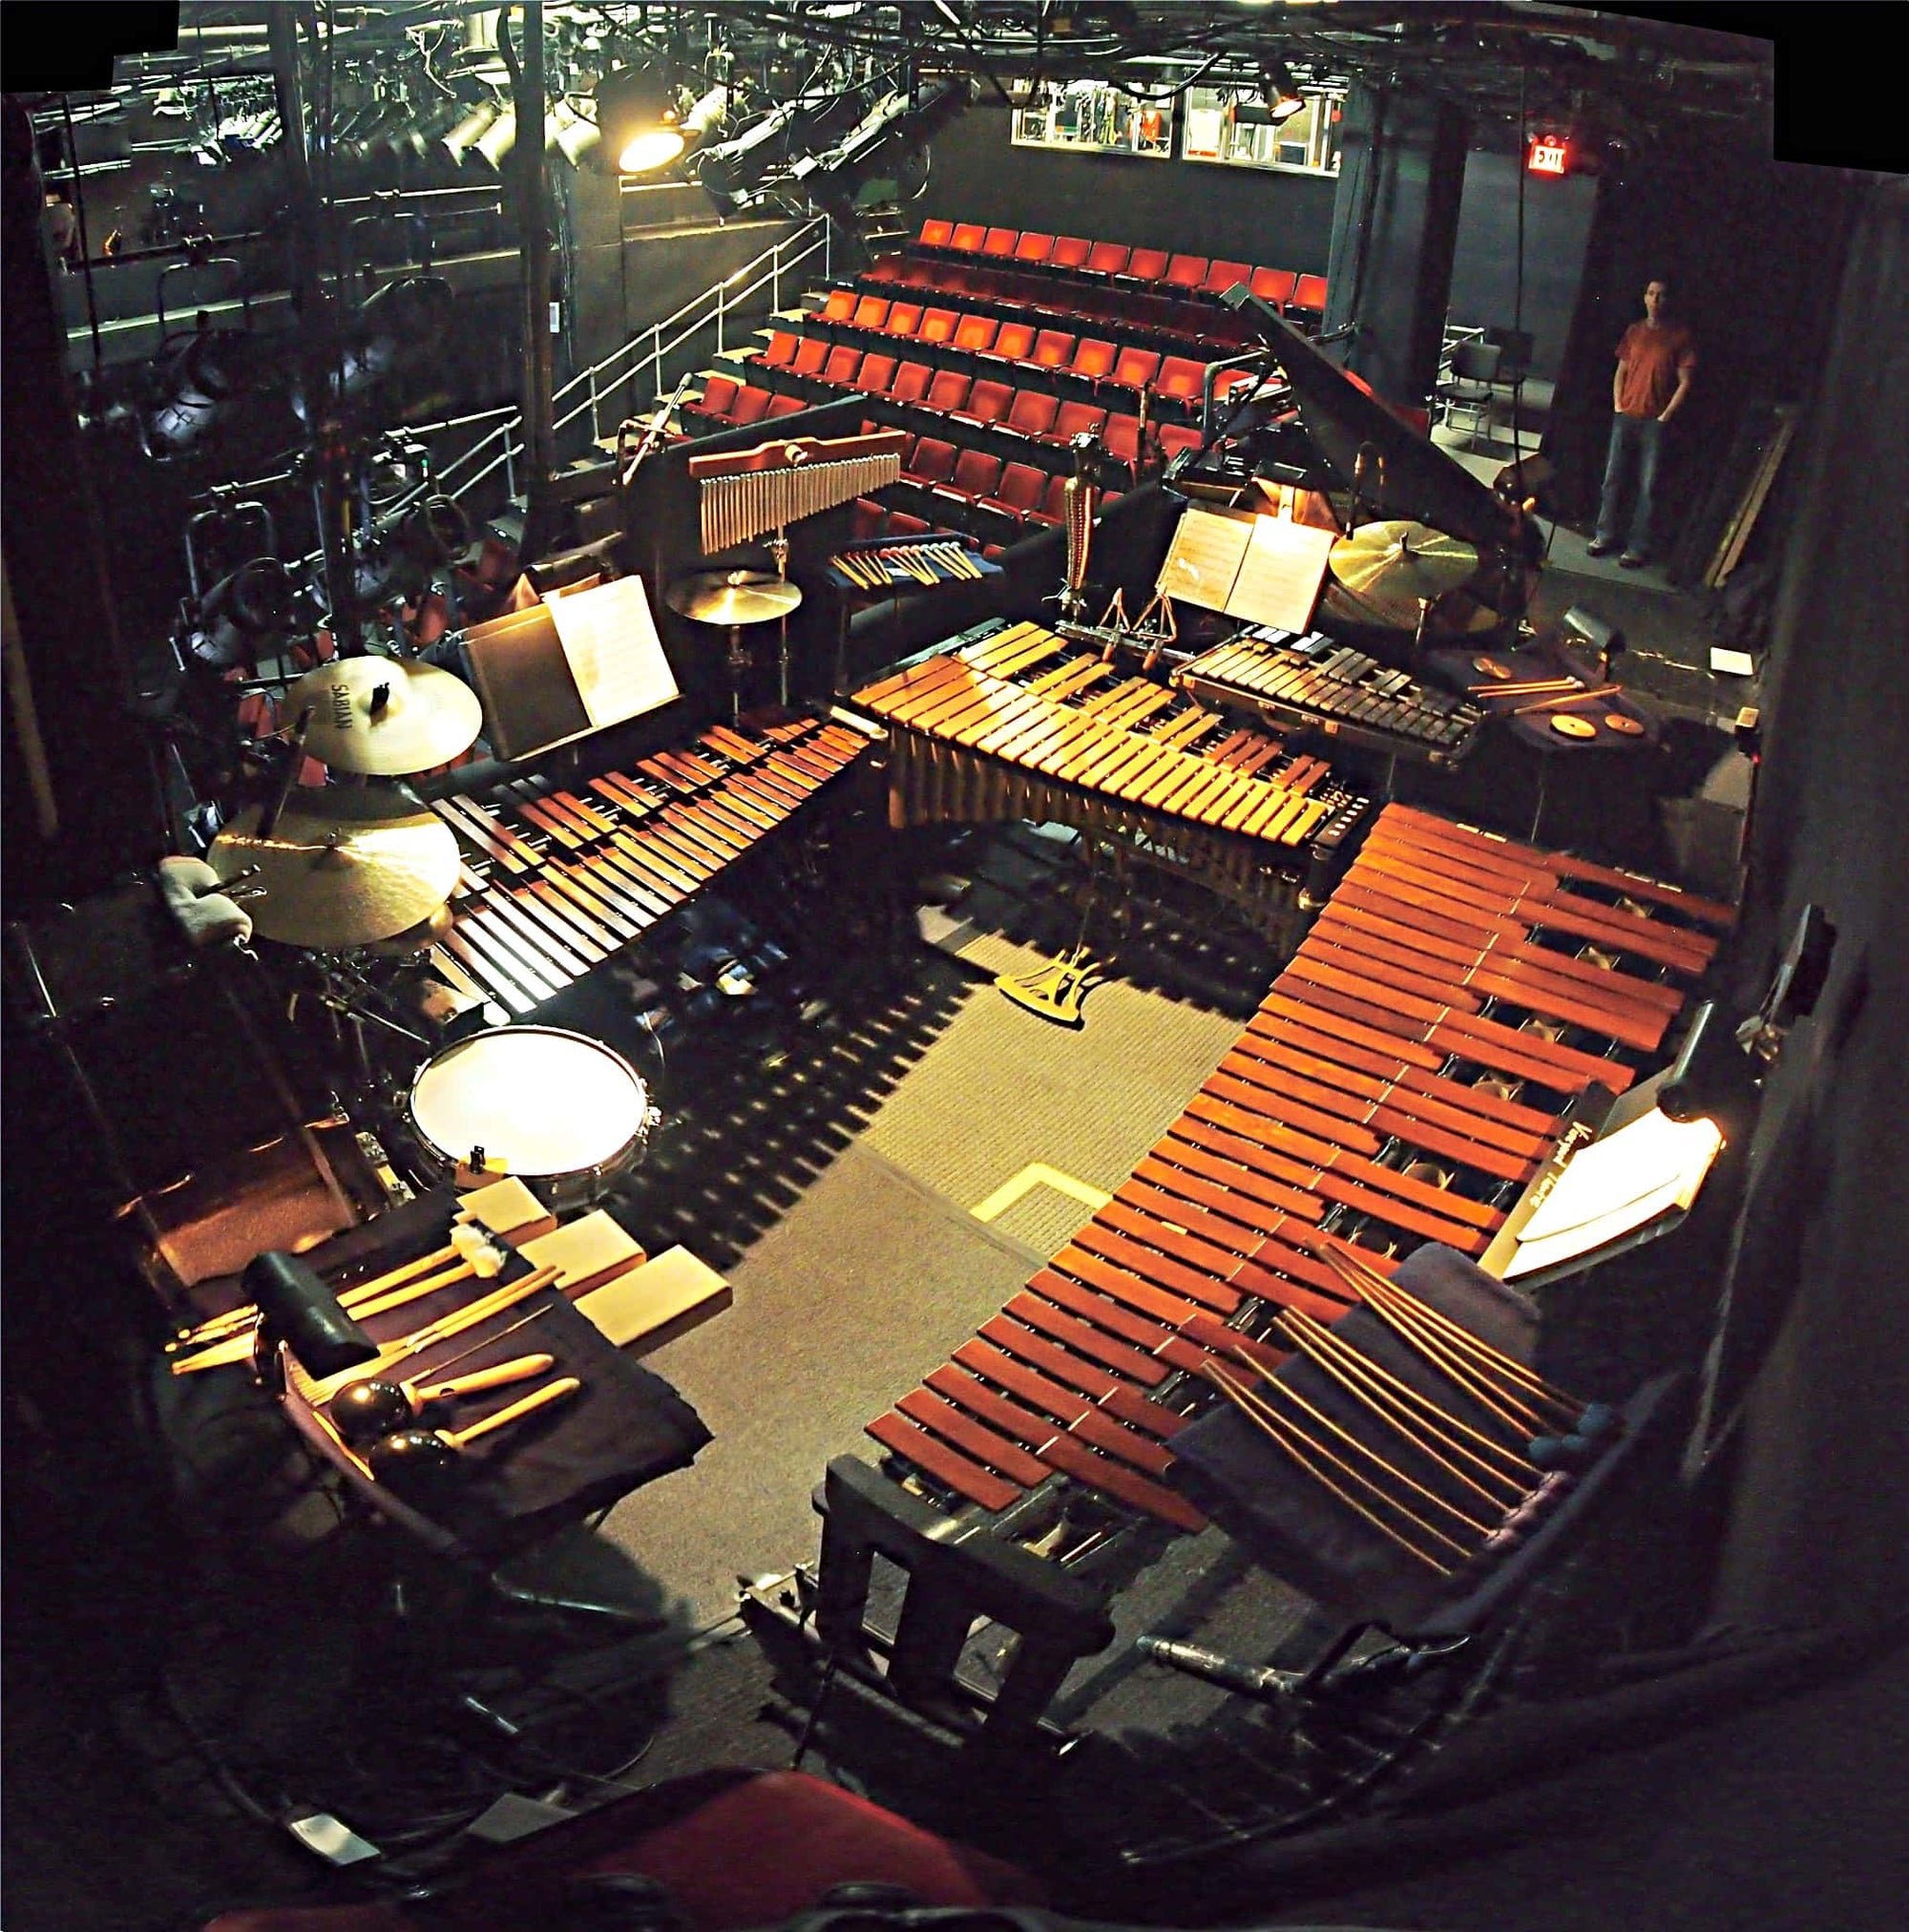 Greg Landes’ setup for the Off Broadway production of The Landing at the Vineyard Theatre in New York City.